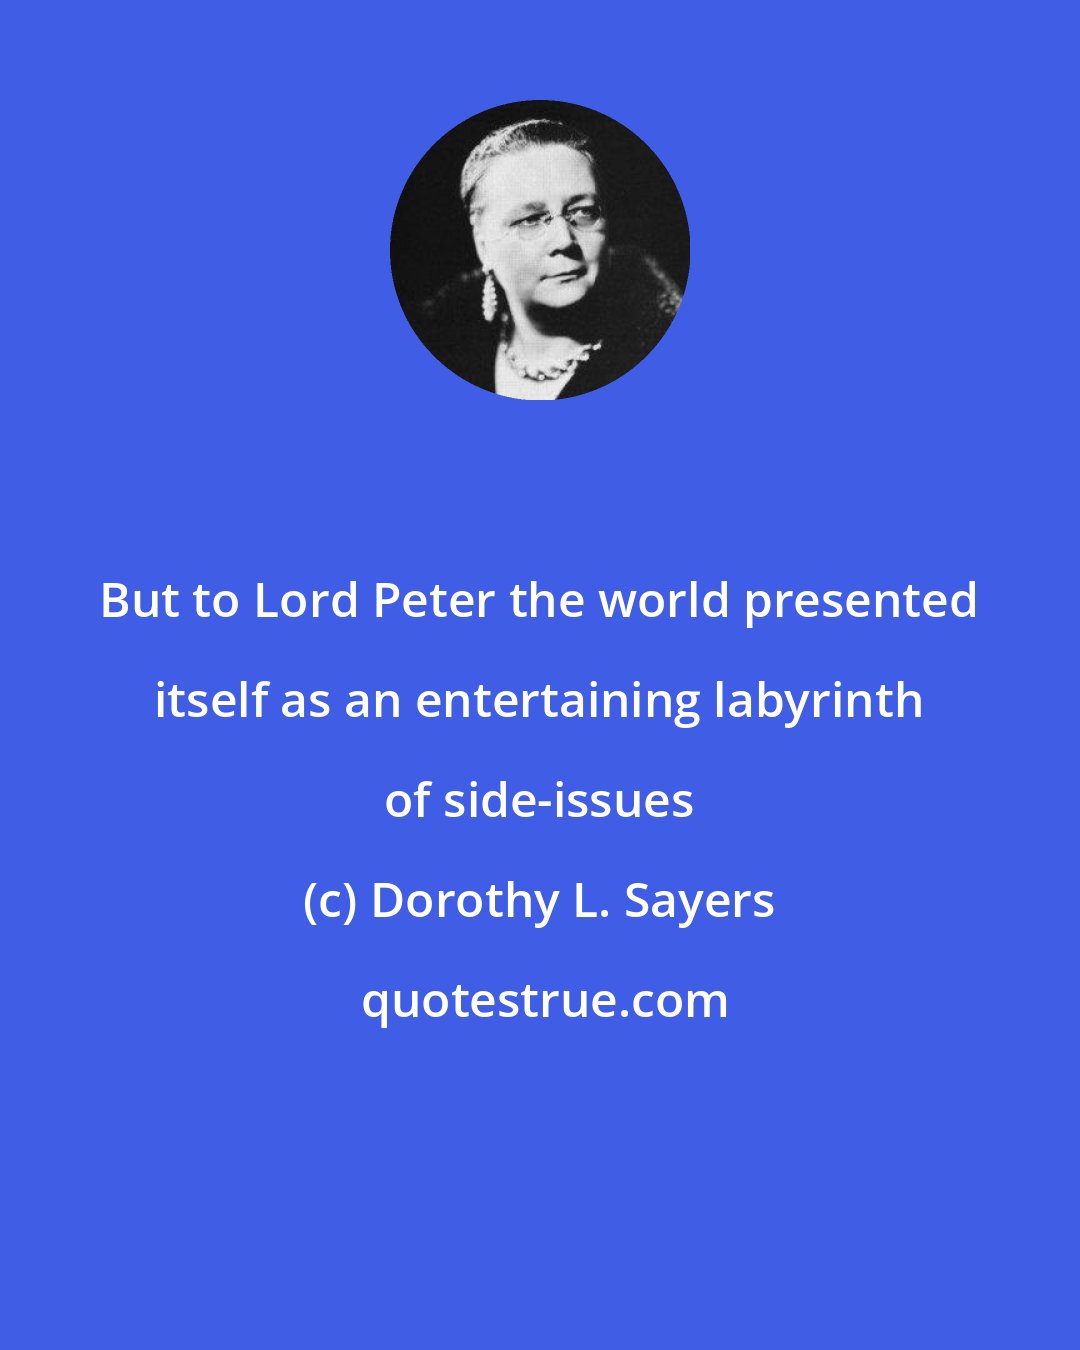 Dorothy L. Sayers: But to Lord Peter the world presented itself as an entertaining labyrinth of side-issues